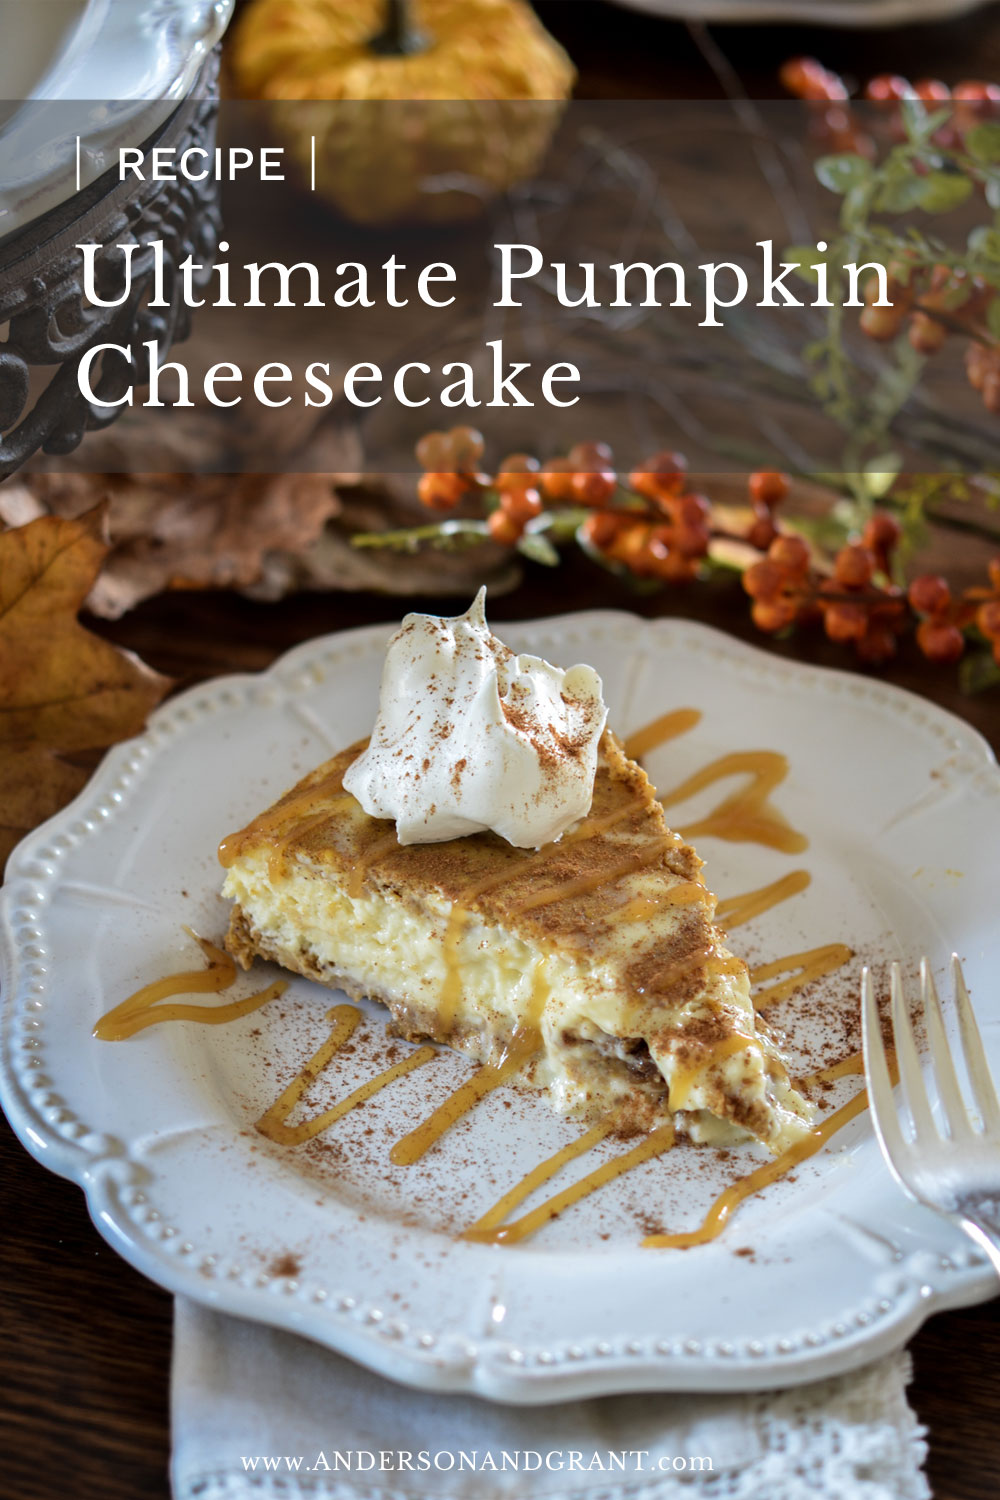 Pumpkin cheesecake with dollop of whipped cream